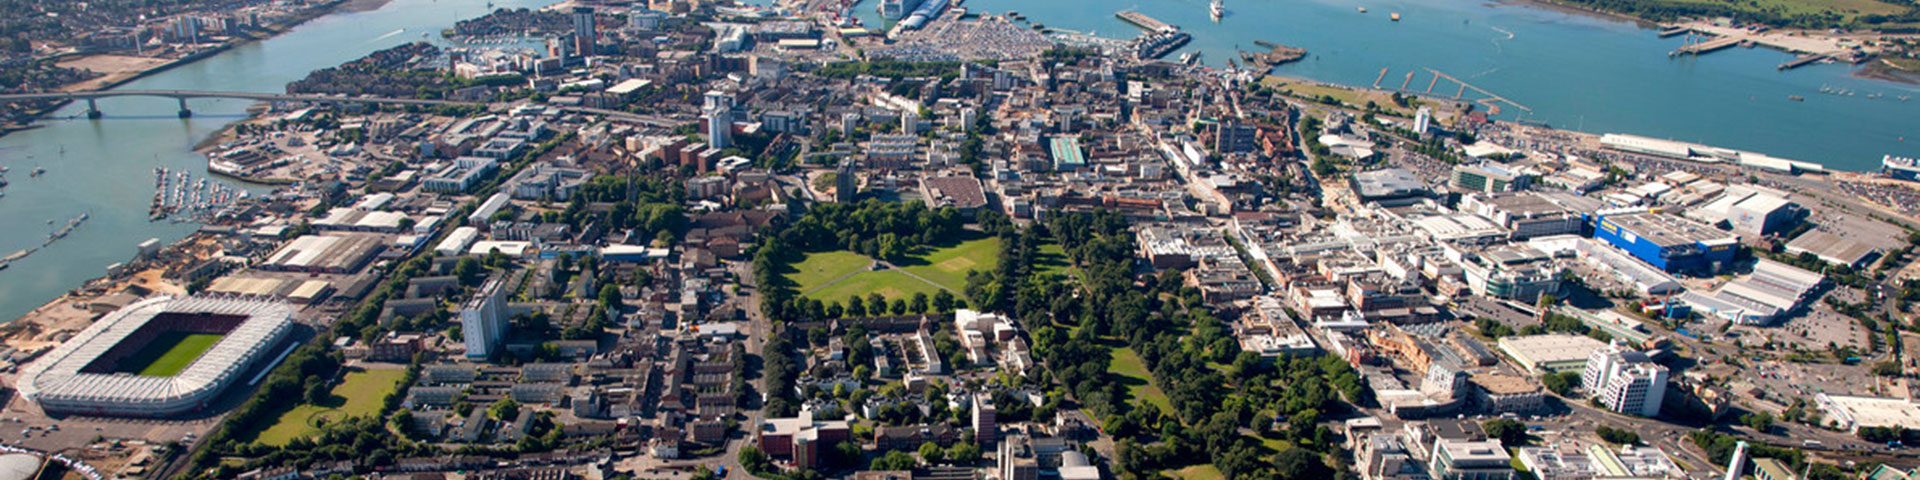 A colouyr picture of Southampton from the air showing the city centre, football ground, edge of the New Forest and the water.